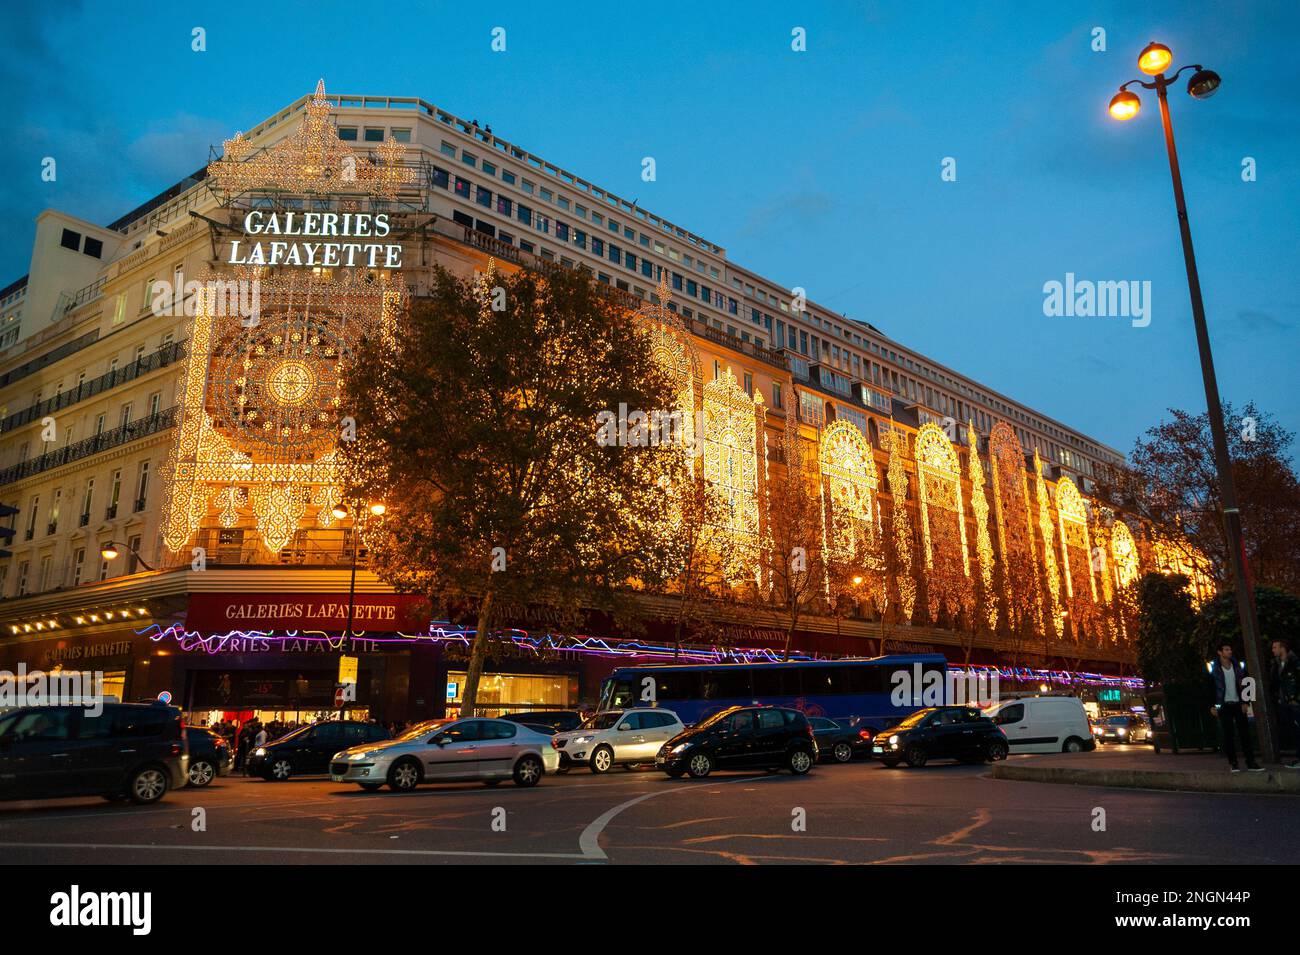 Views outside galeries lafayette department store hi-res stock